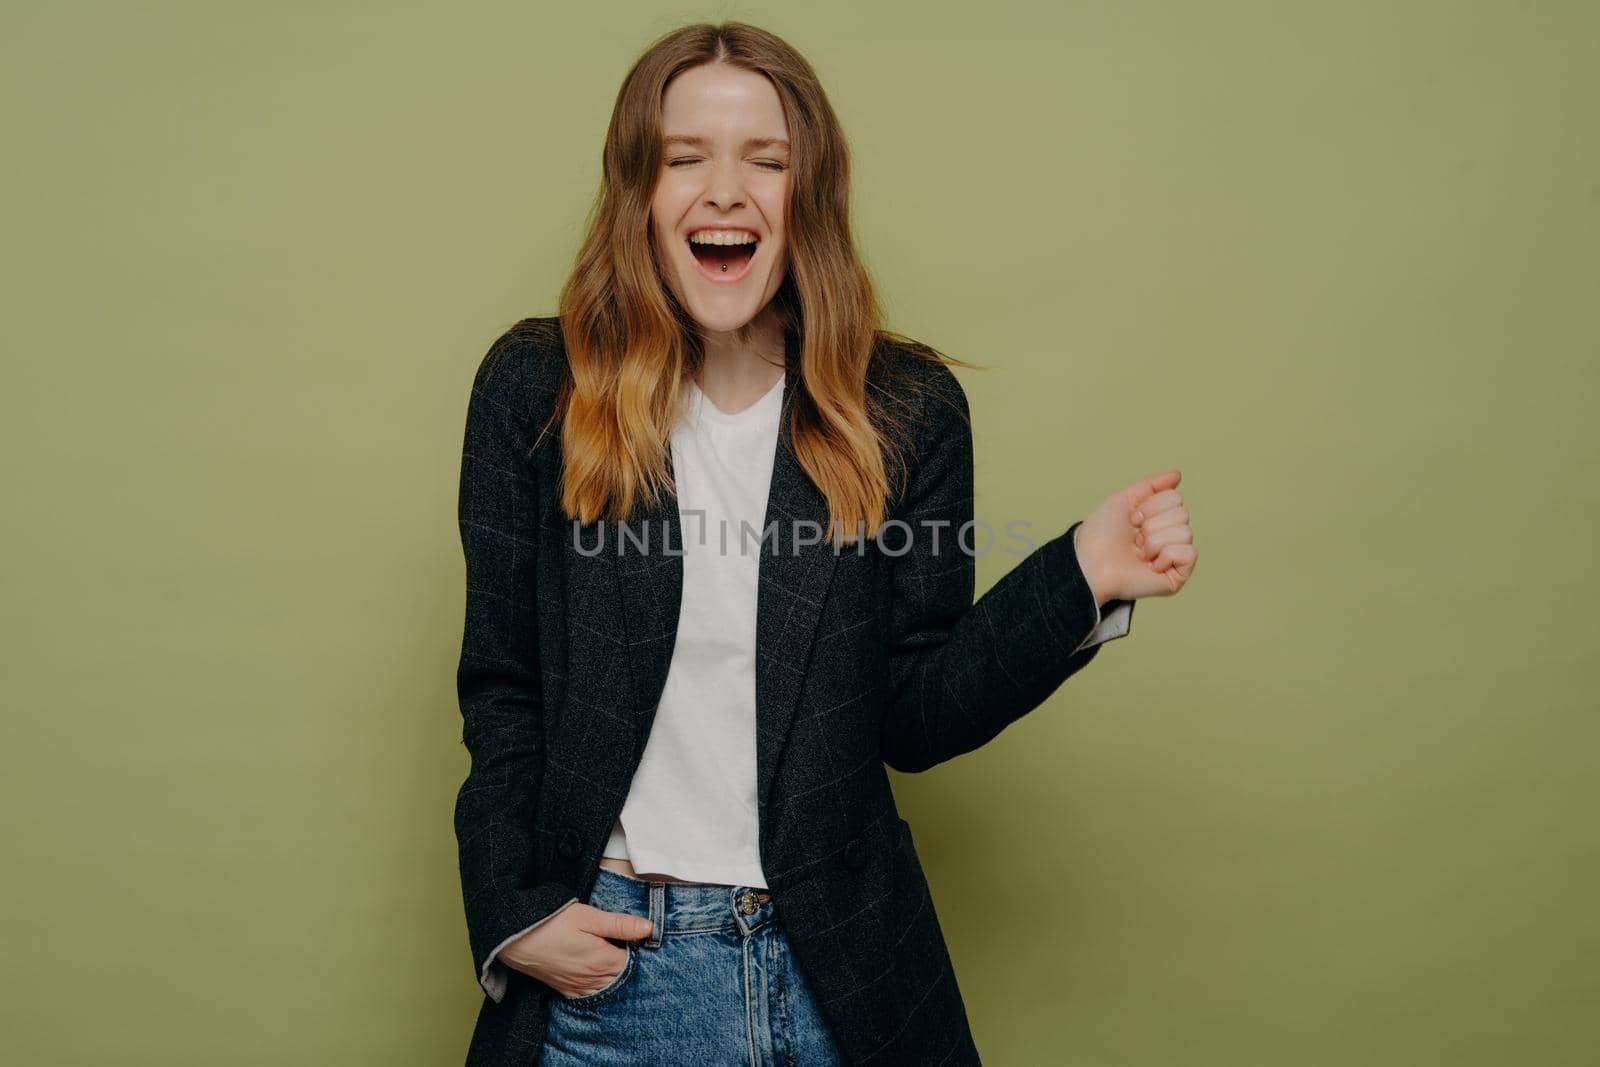 Excitement. Studio shot of surprised and happy young woman with wavy brown hair posing in dark formal jacket, white top and jeans on green background with one hand in pocket. Personal achievements